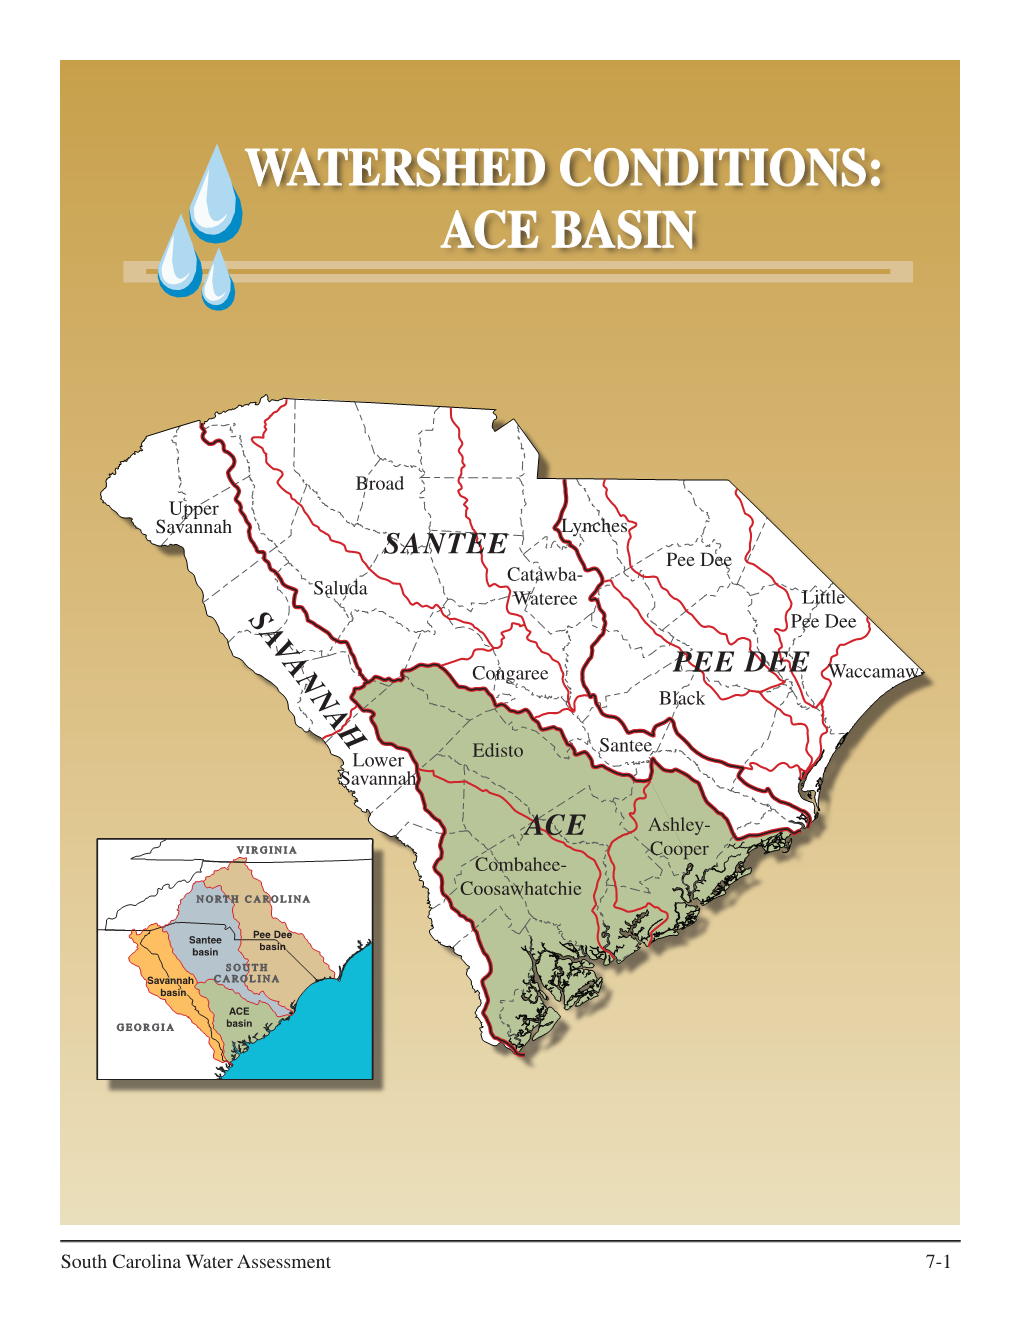 South Caroolina State Water Assessment, 2Nd Ed., Chapter 7